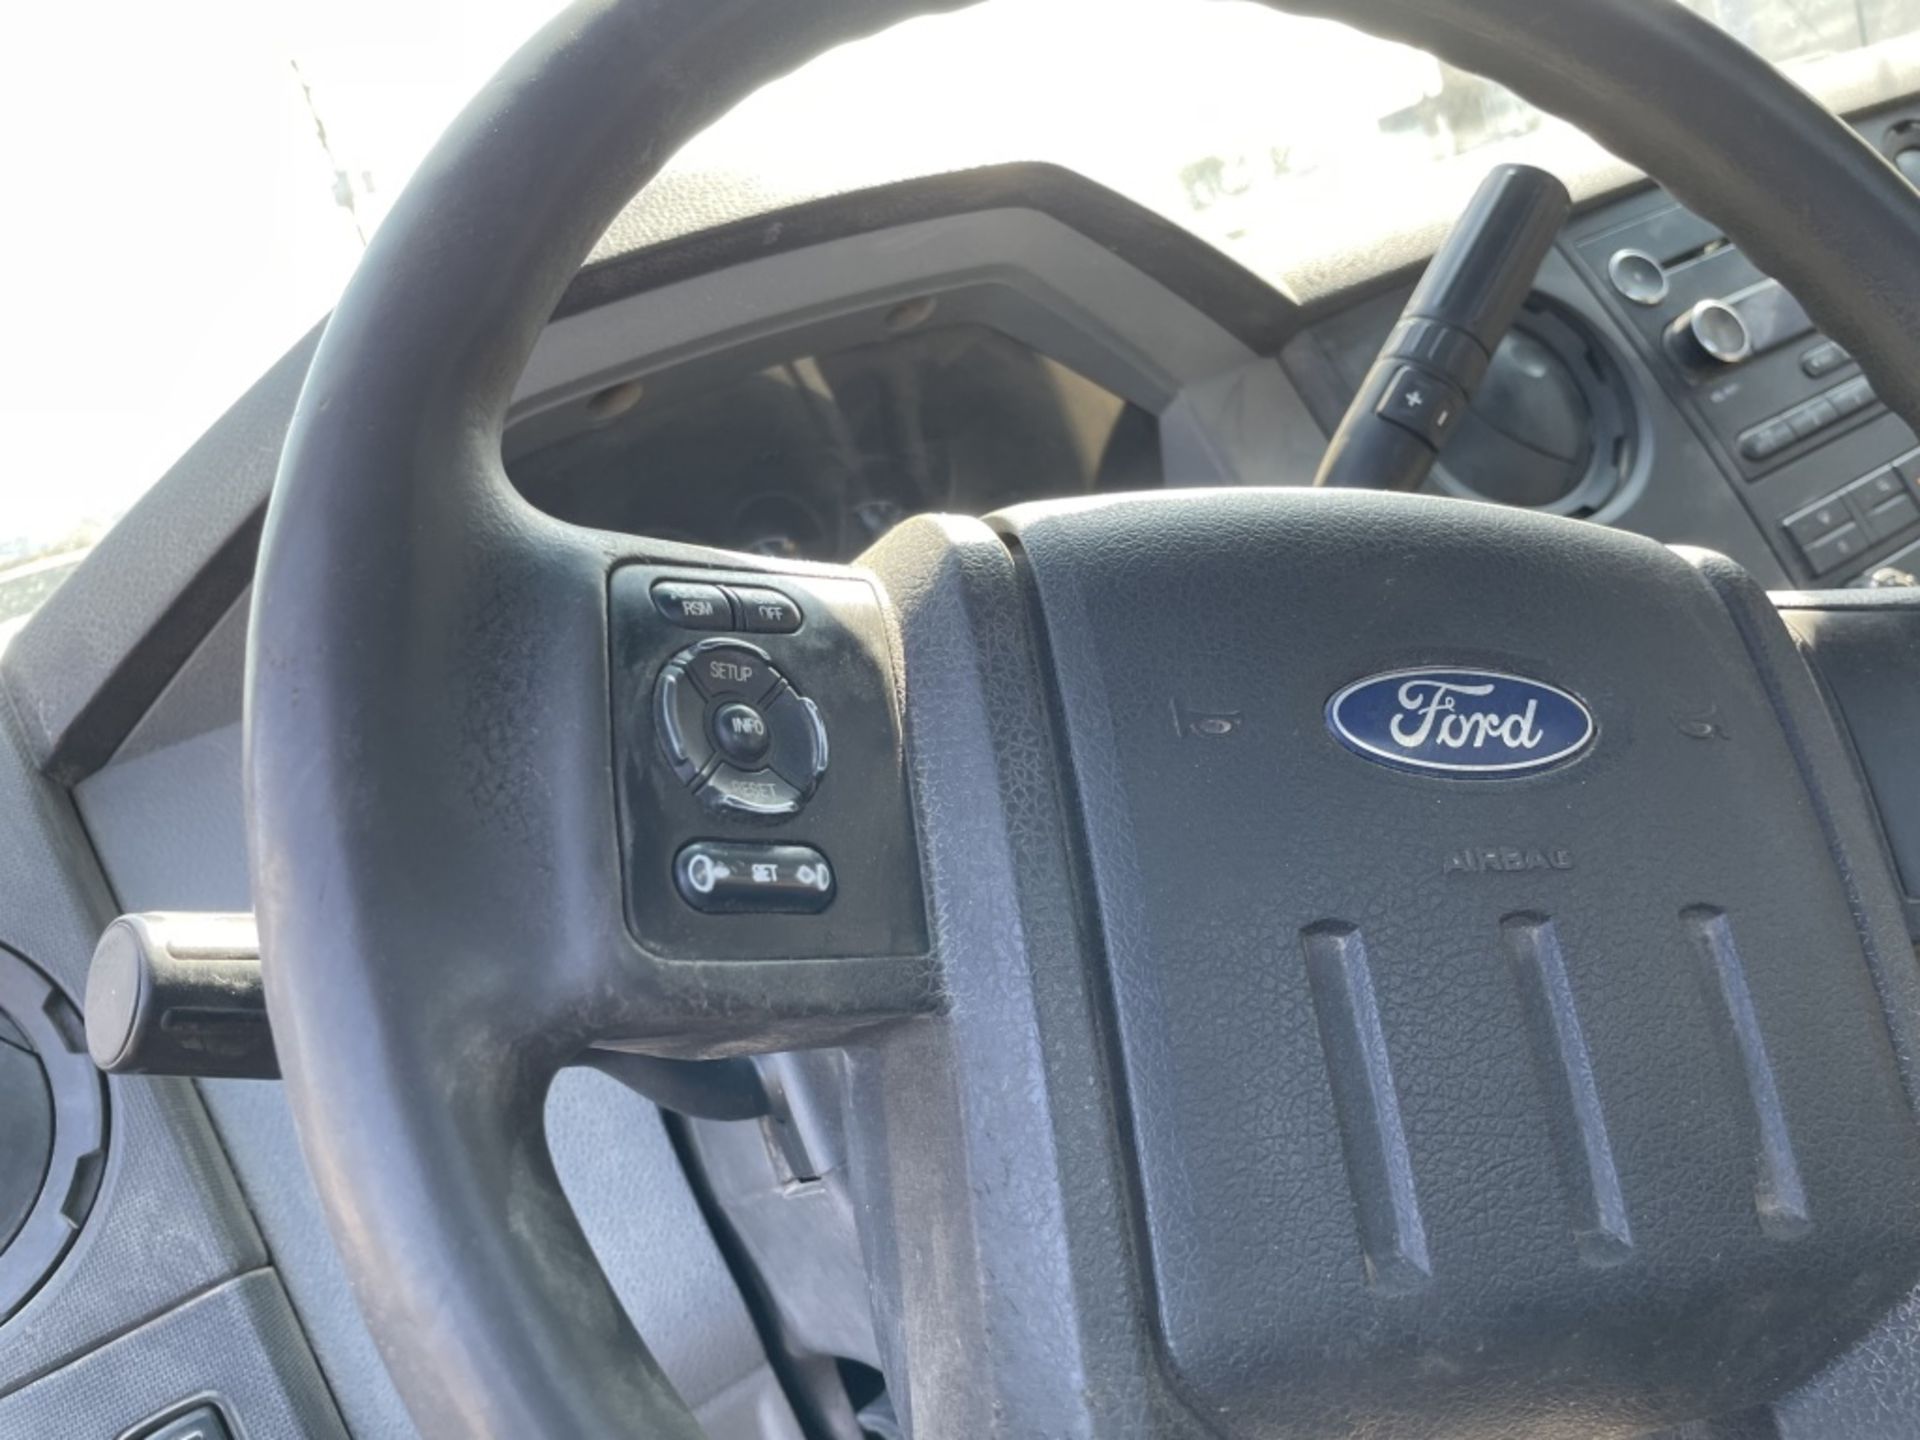 2011 Ford F550 XL SD 4x4 Utility Truck - Image 20 of 22